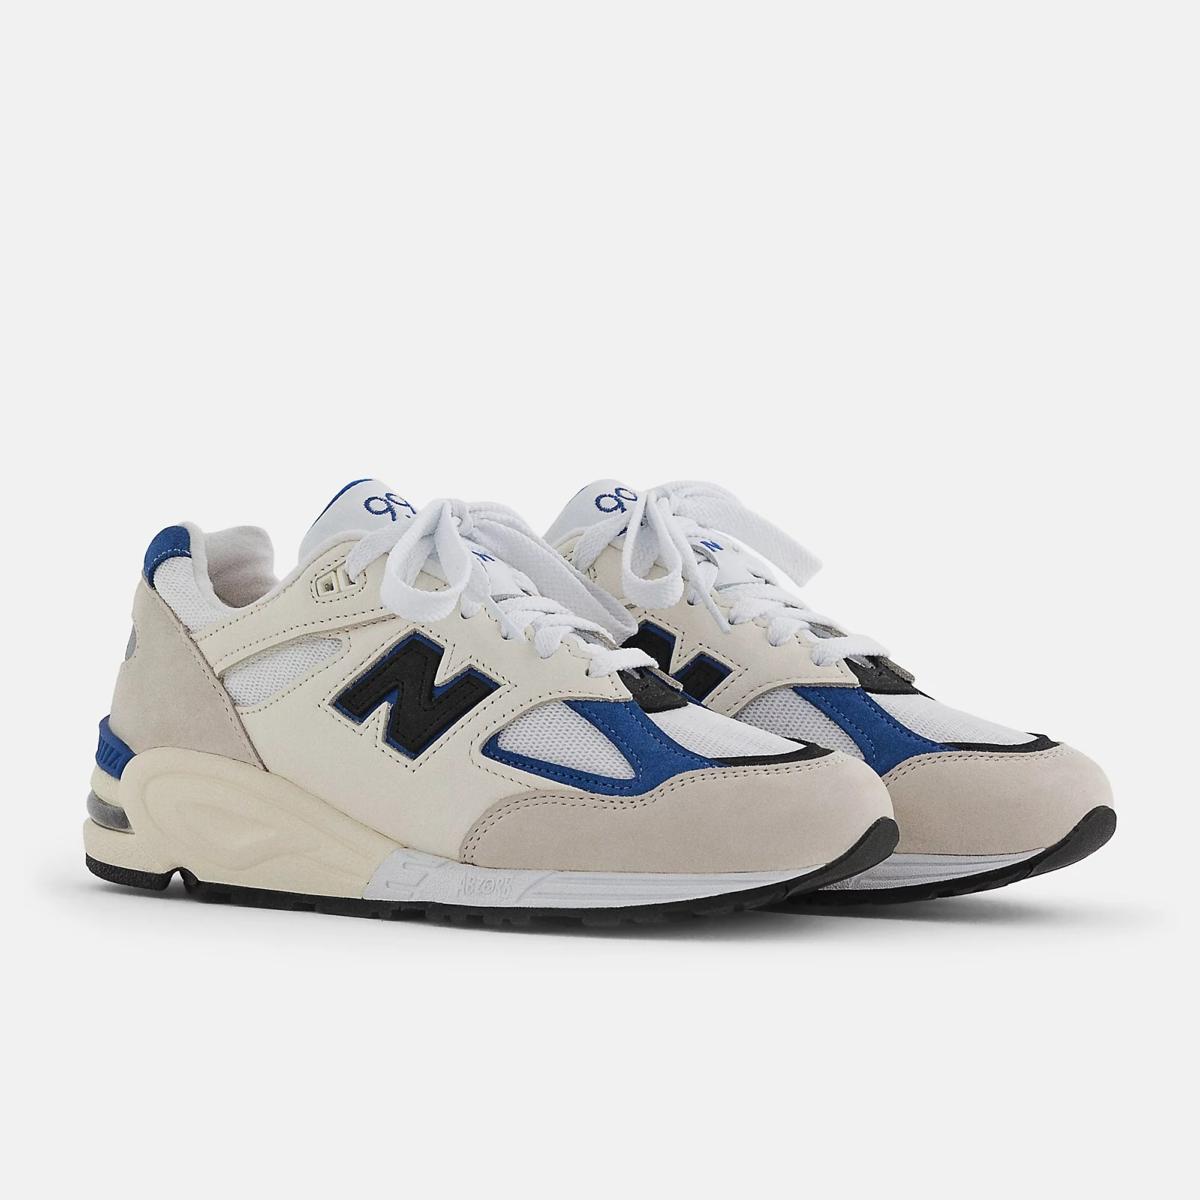  New Balance  Made in USA 990v2  m990WB2